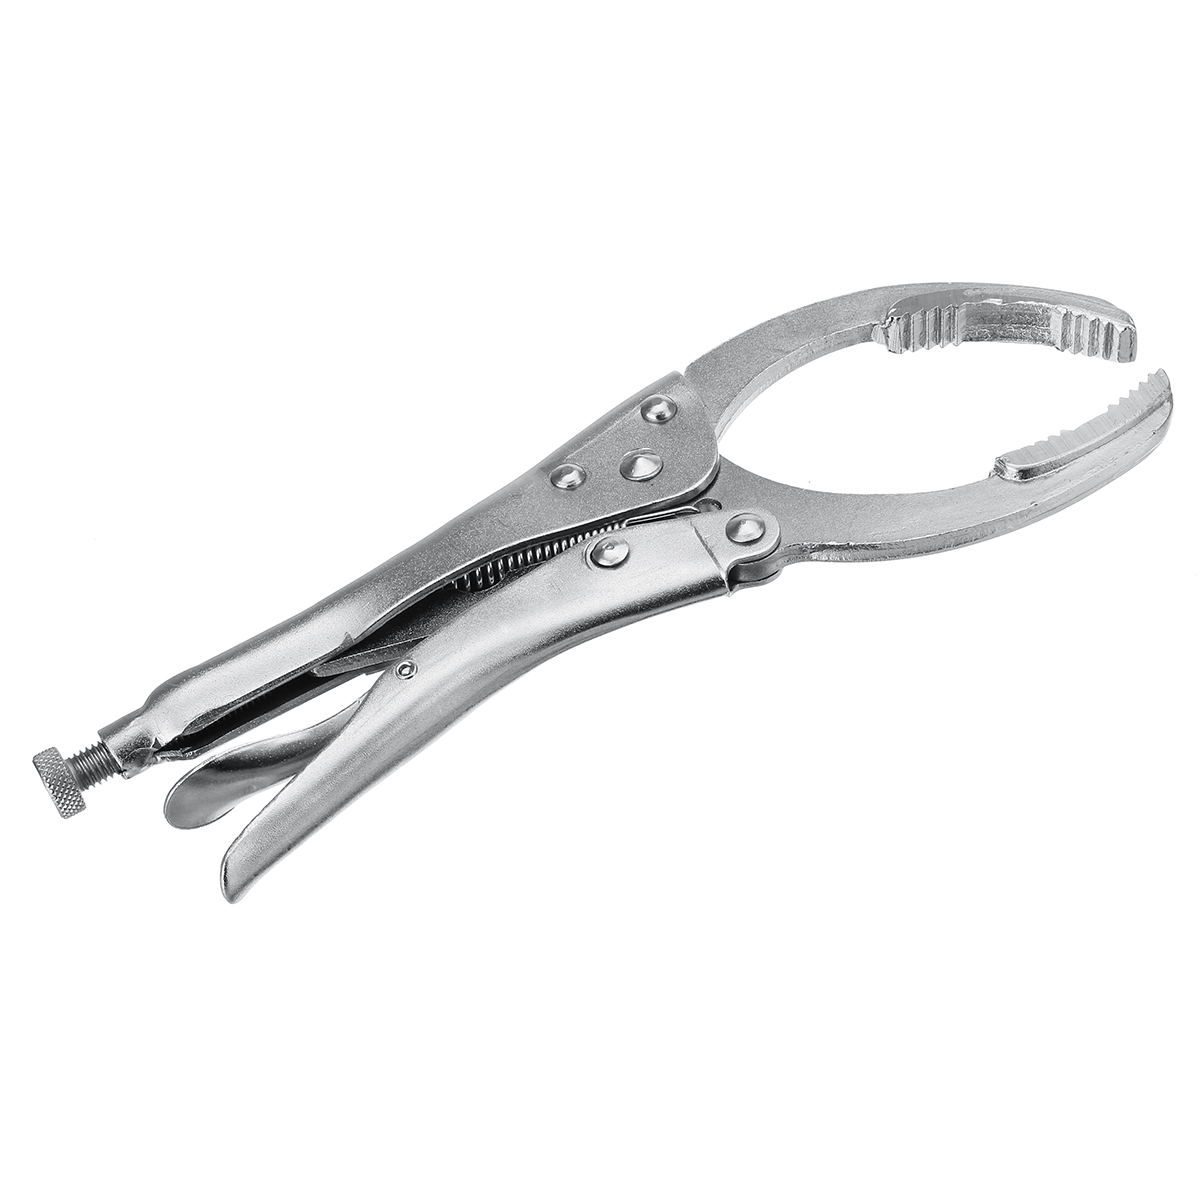 Self-Grip-Oil-Filter-Removal-Tool-Wrench-Pliers-Multi-Purpose-Hand-Remover-Tool-1446280-3